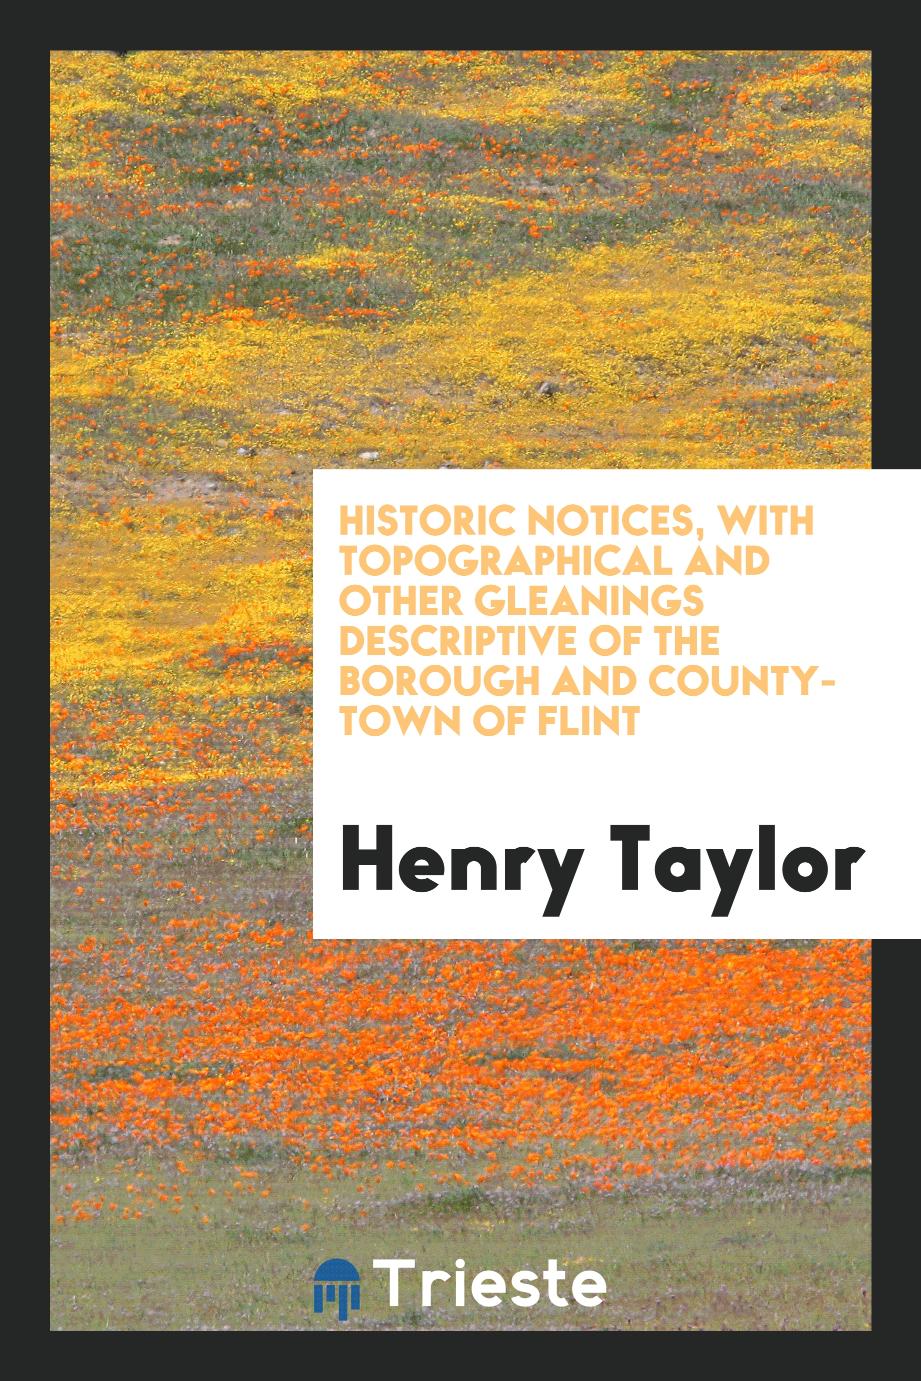 Historic notices, with topographical and other gleanings descriptive of the borough and county-town of Flint